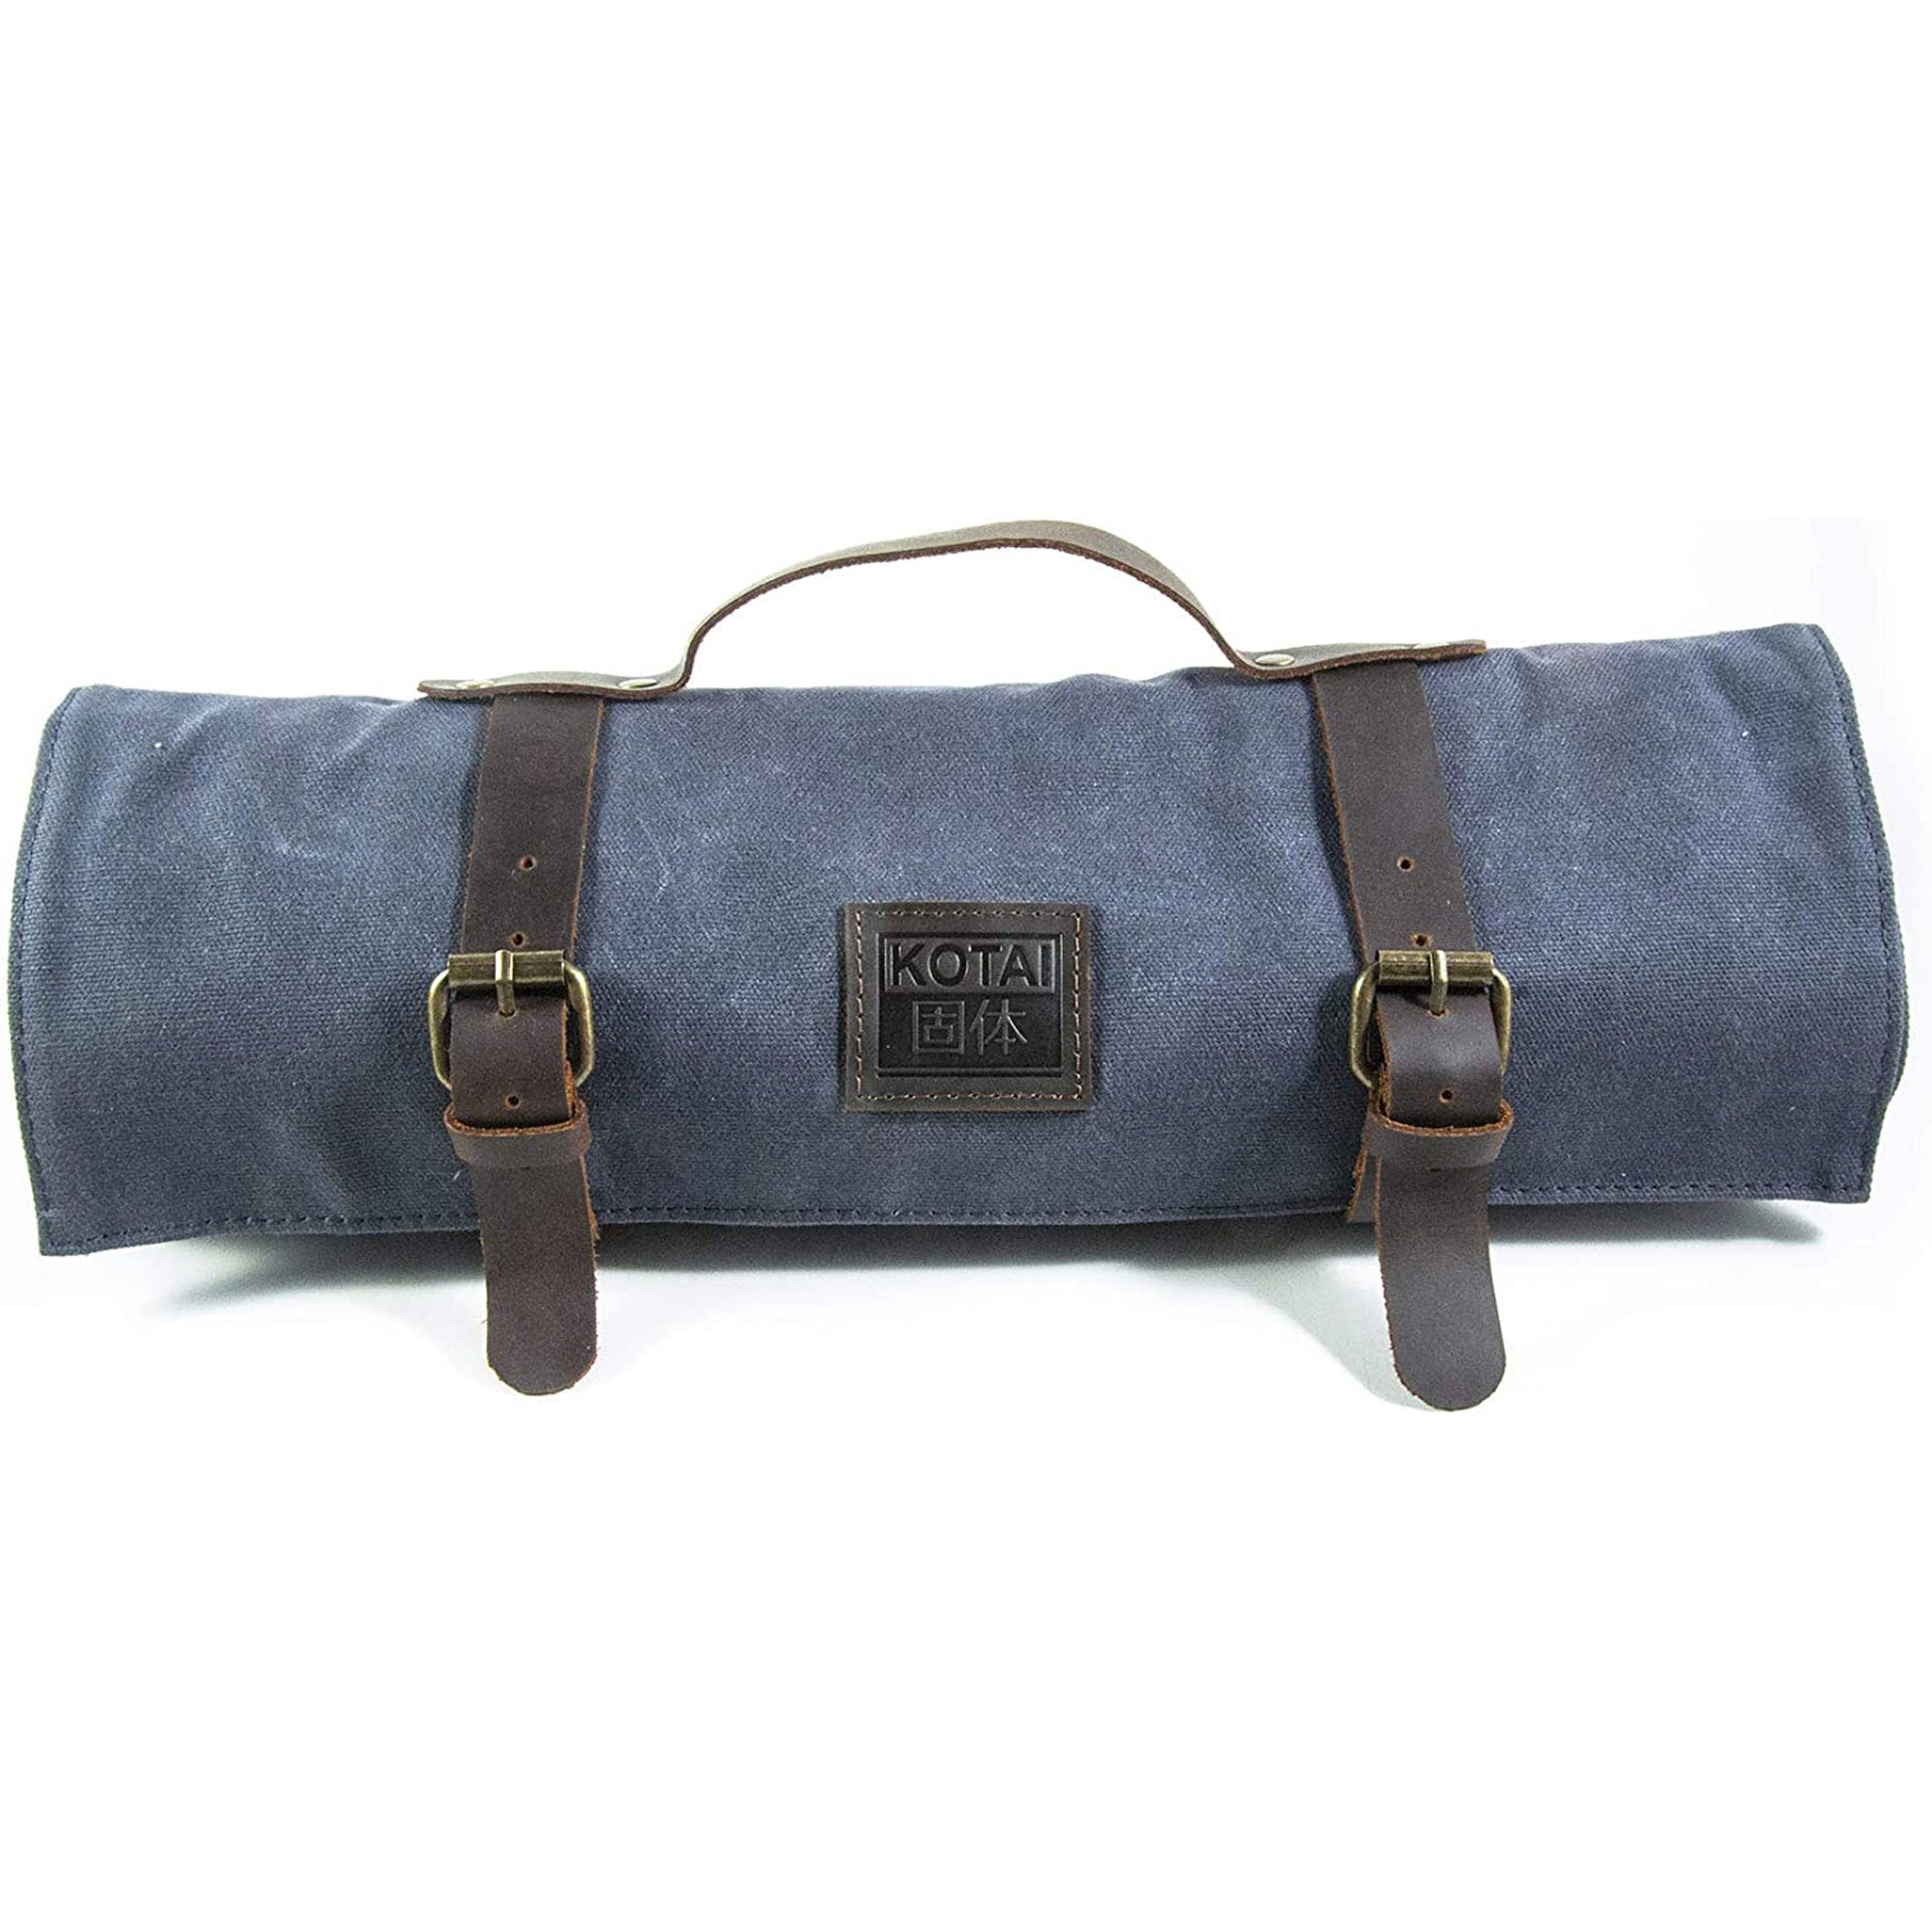 CHEF KNIFE ROLL-UP BAG | TRAVEL KNIFE BAG |  Cotton Canvas & Leather | Kotai